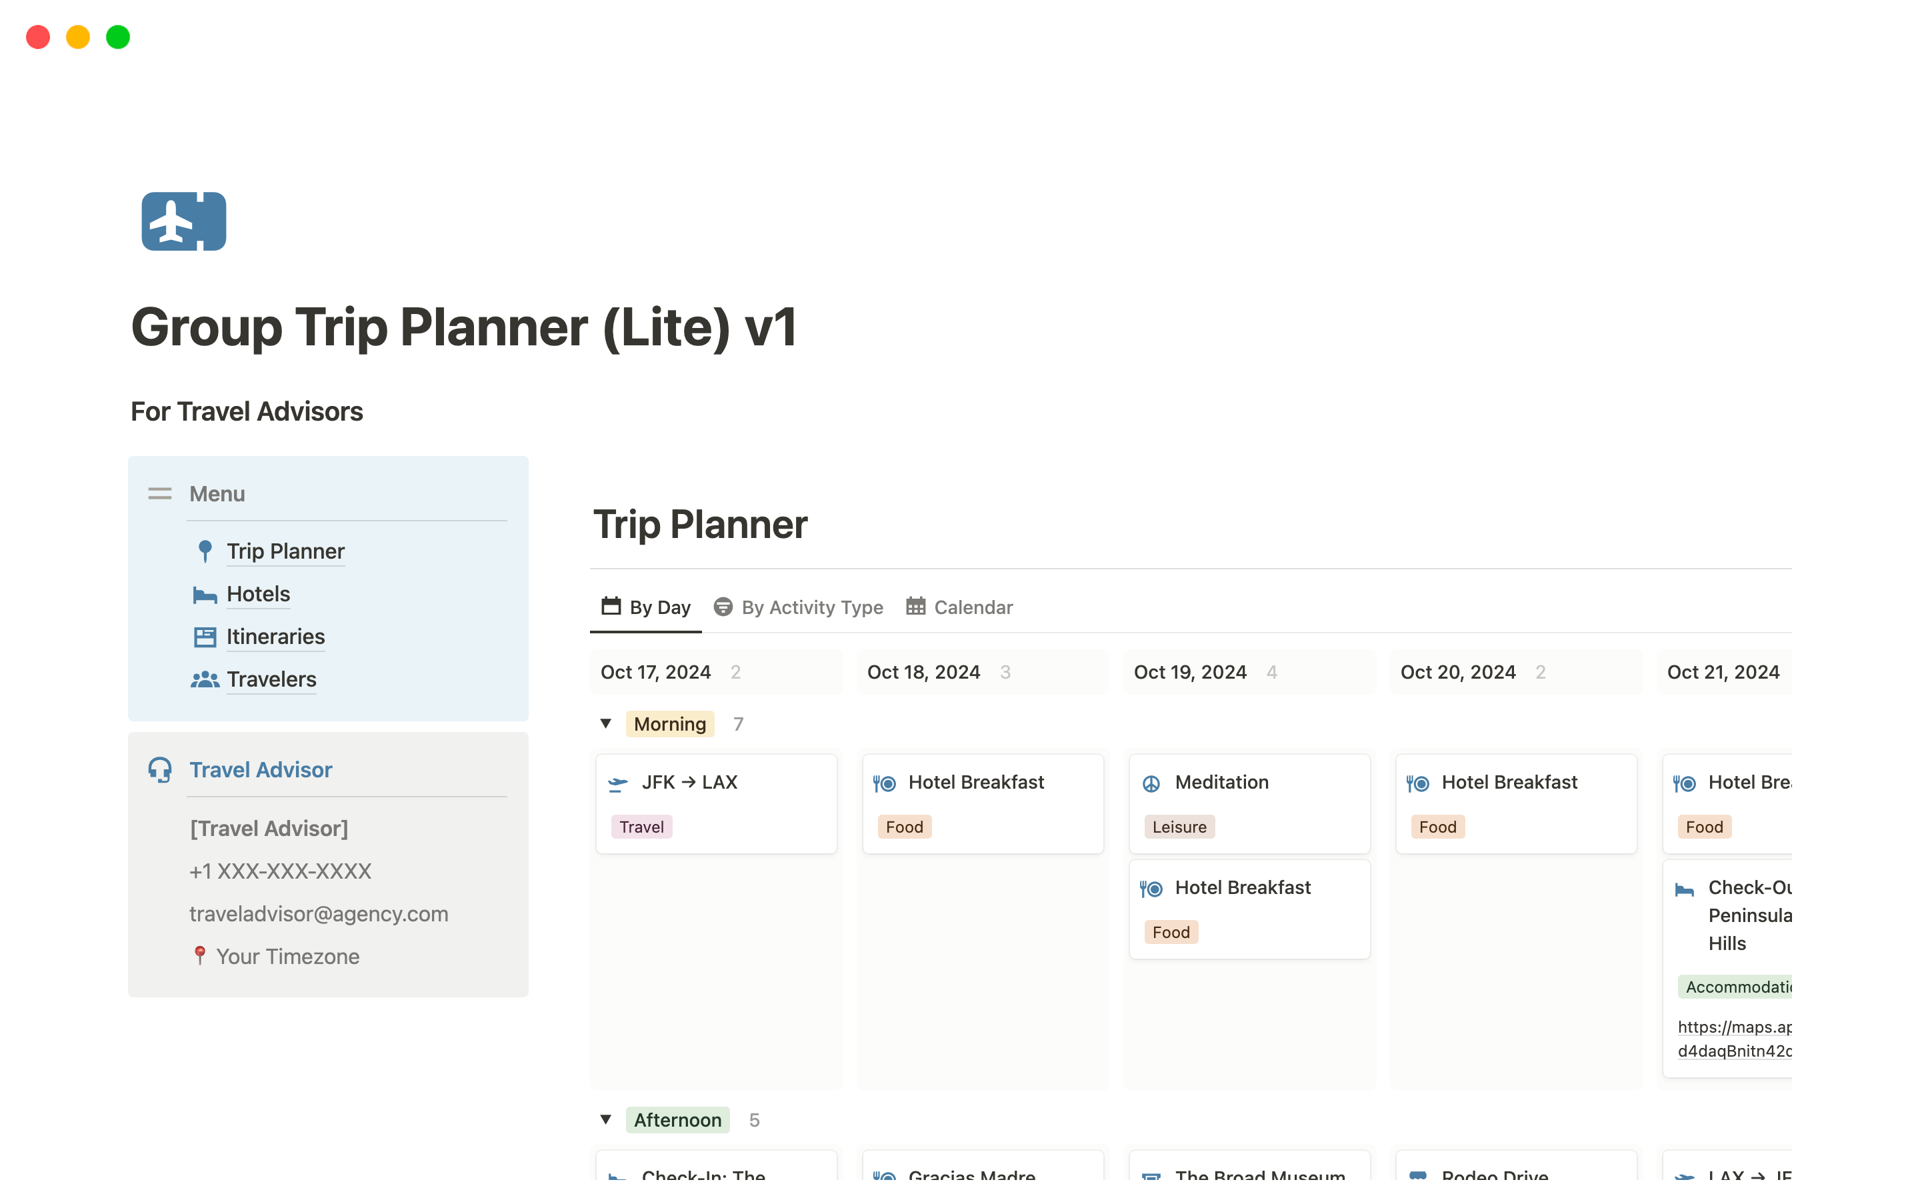 Say hello to hassle-free group travel planning. Group Trip Planner (Lite) is designed to make planning your next trip simple and effortless.